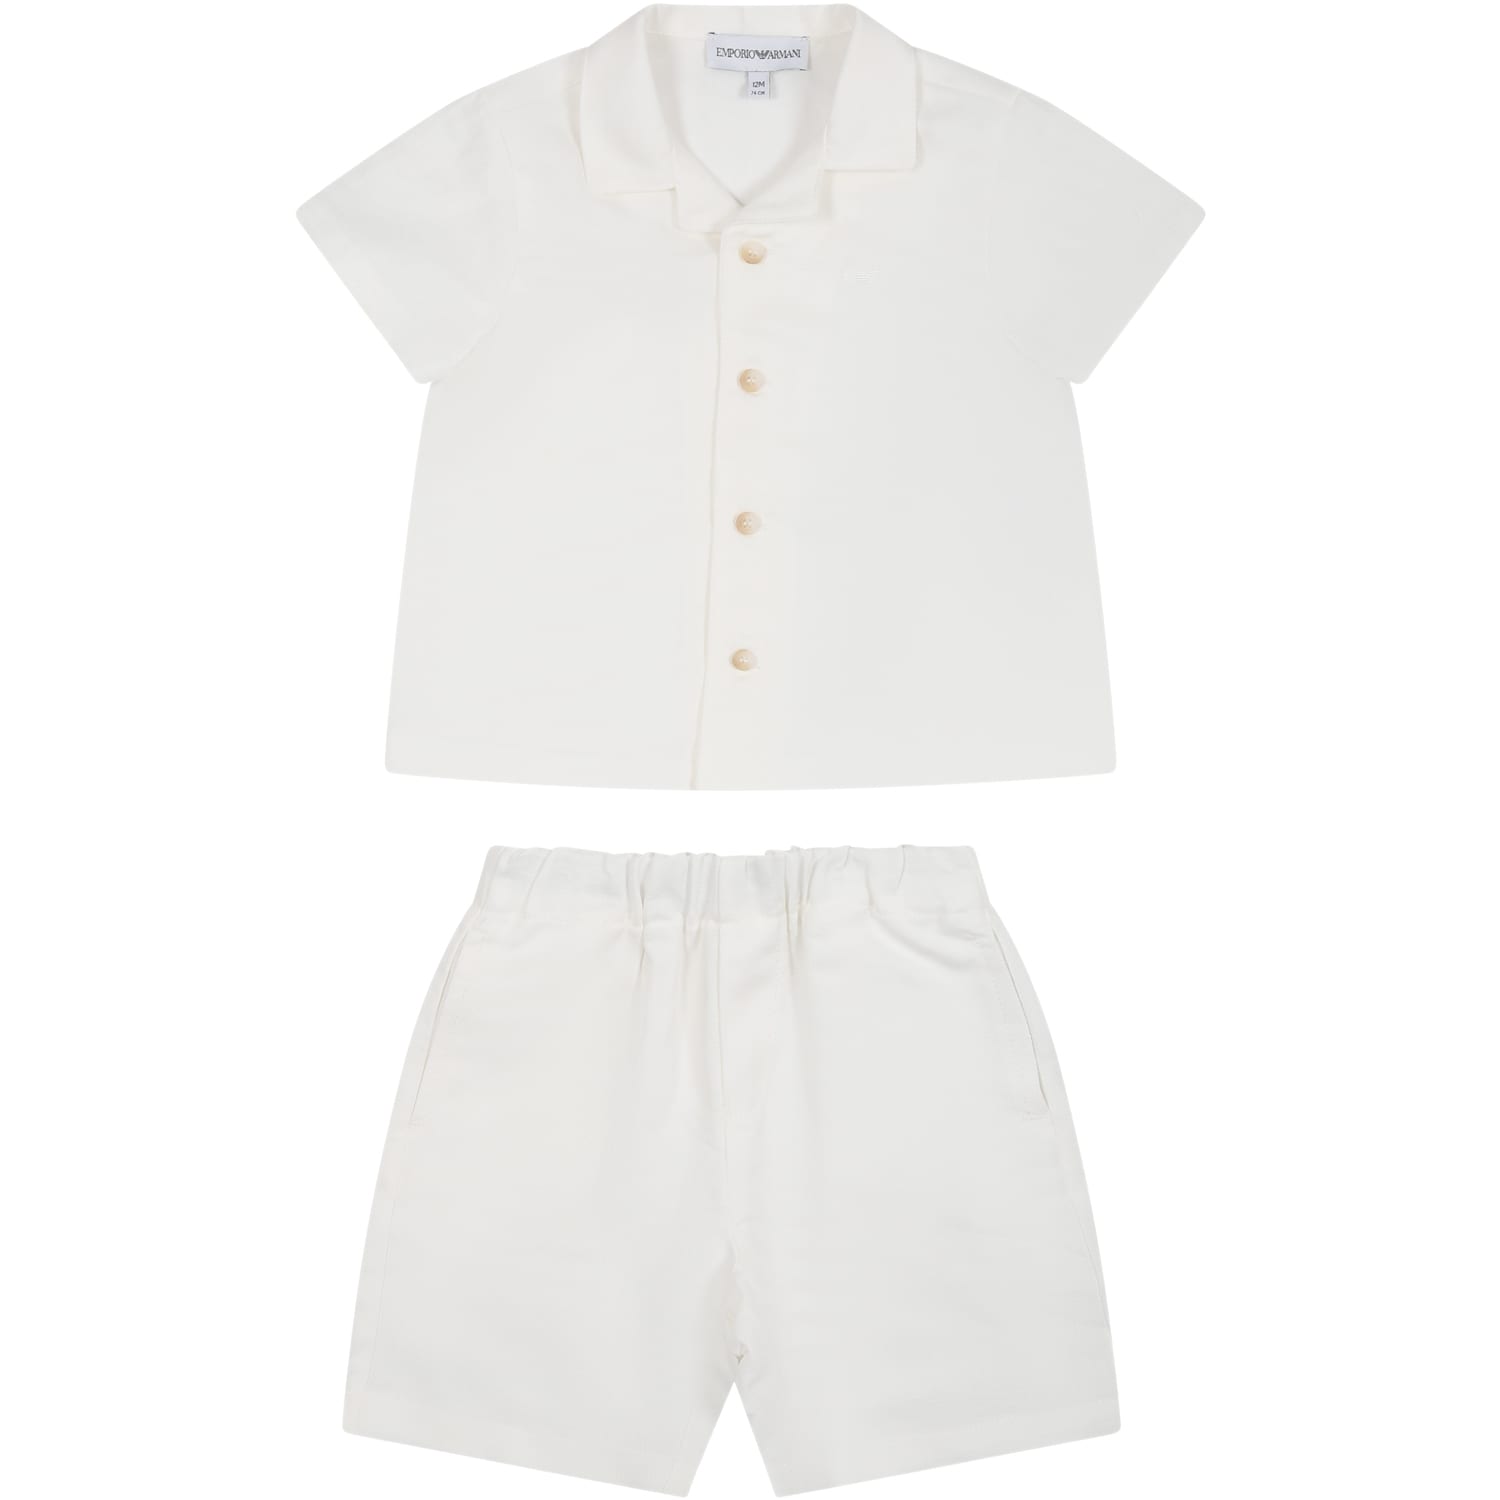 Armani Collezioni White Suit For Baby Boy With Iconic Eagle